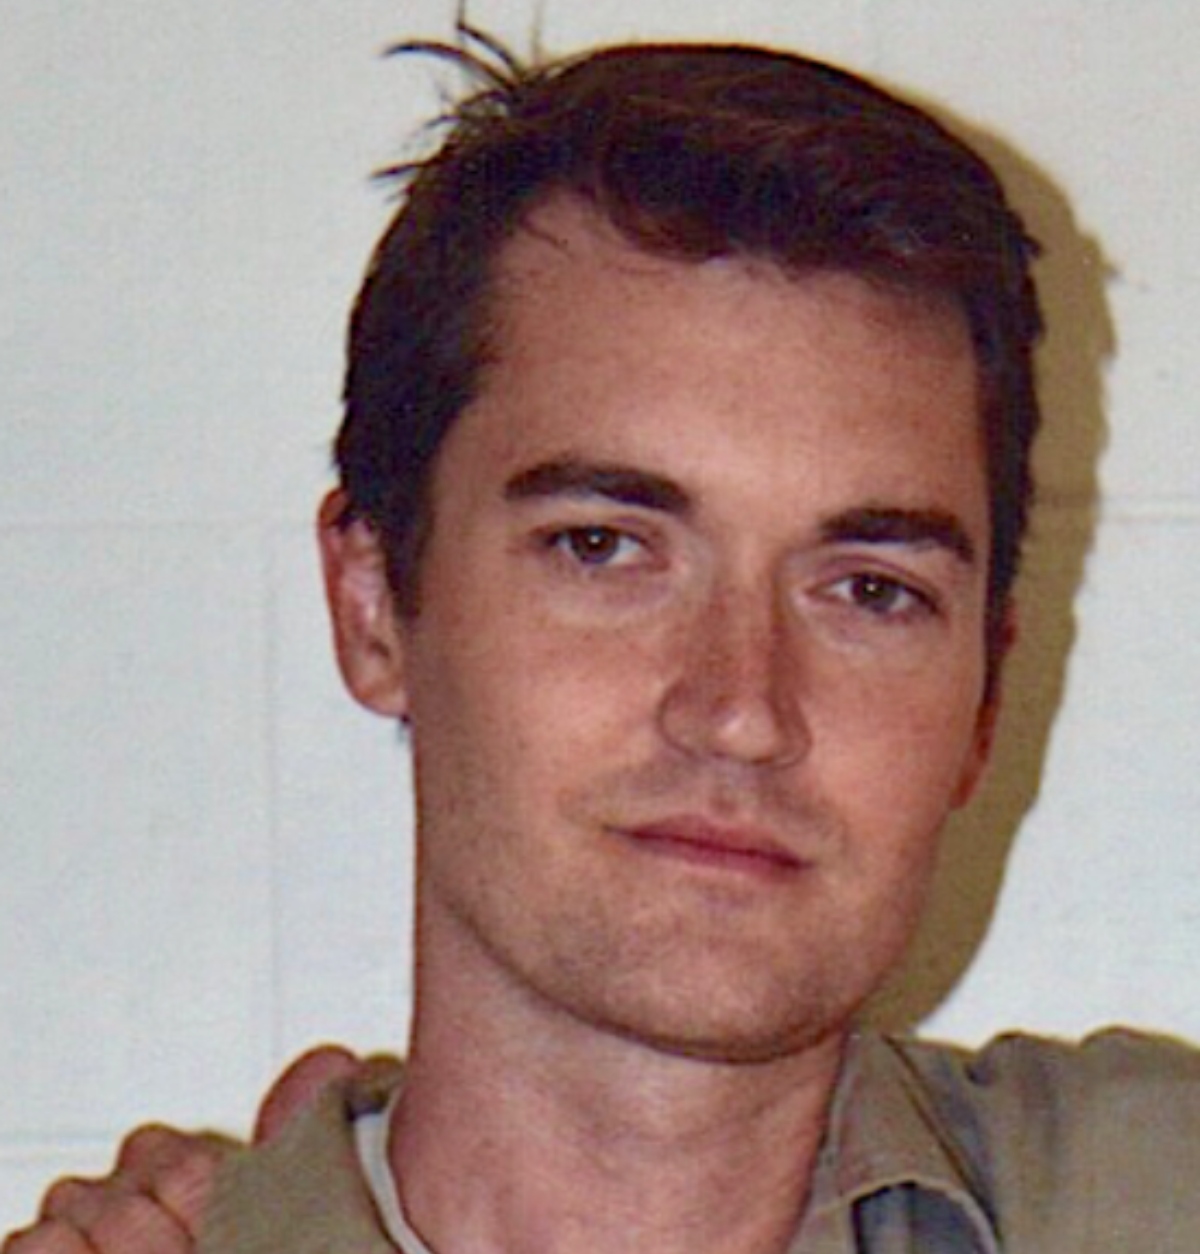 Ross Ulbricht is serving two life imprisonment terms, plus 40 years